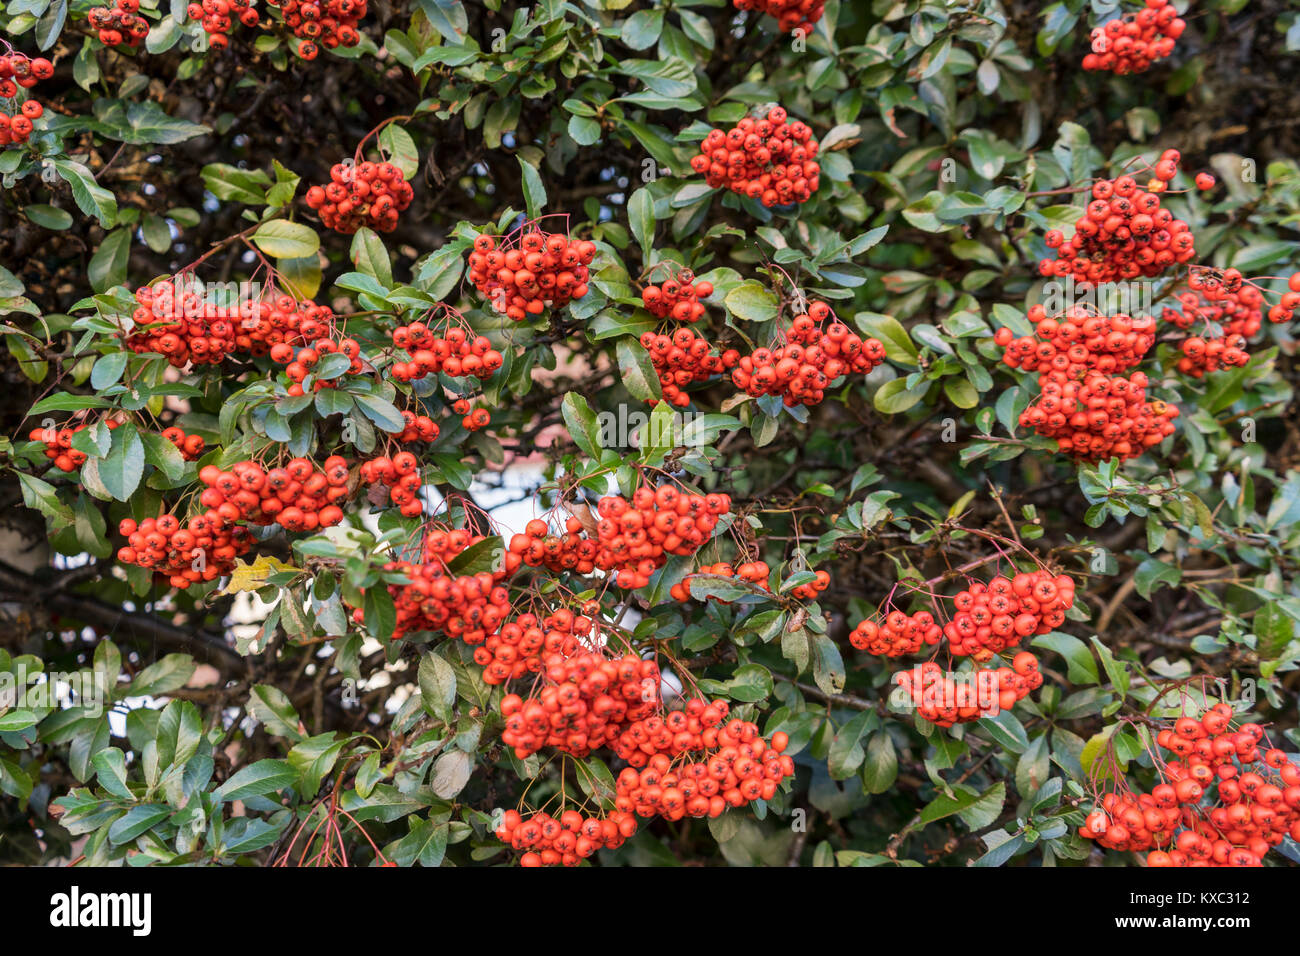 Bright red/ orange berries on a Firethorn plant (Pyracantha coccinea), garden shrub in December, England, UK Stock Photo